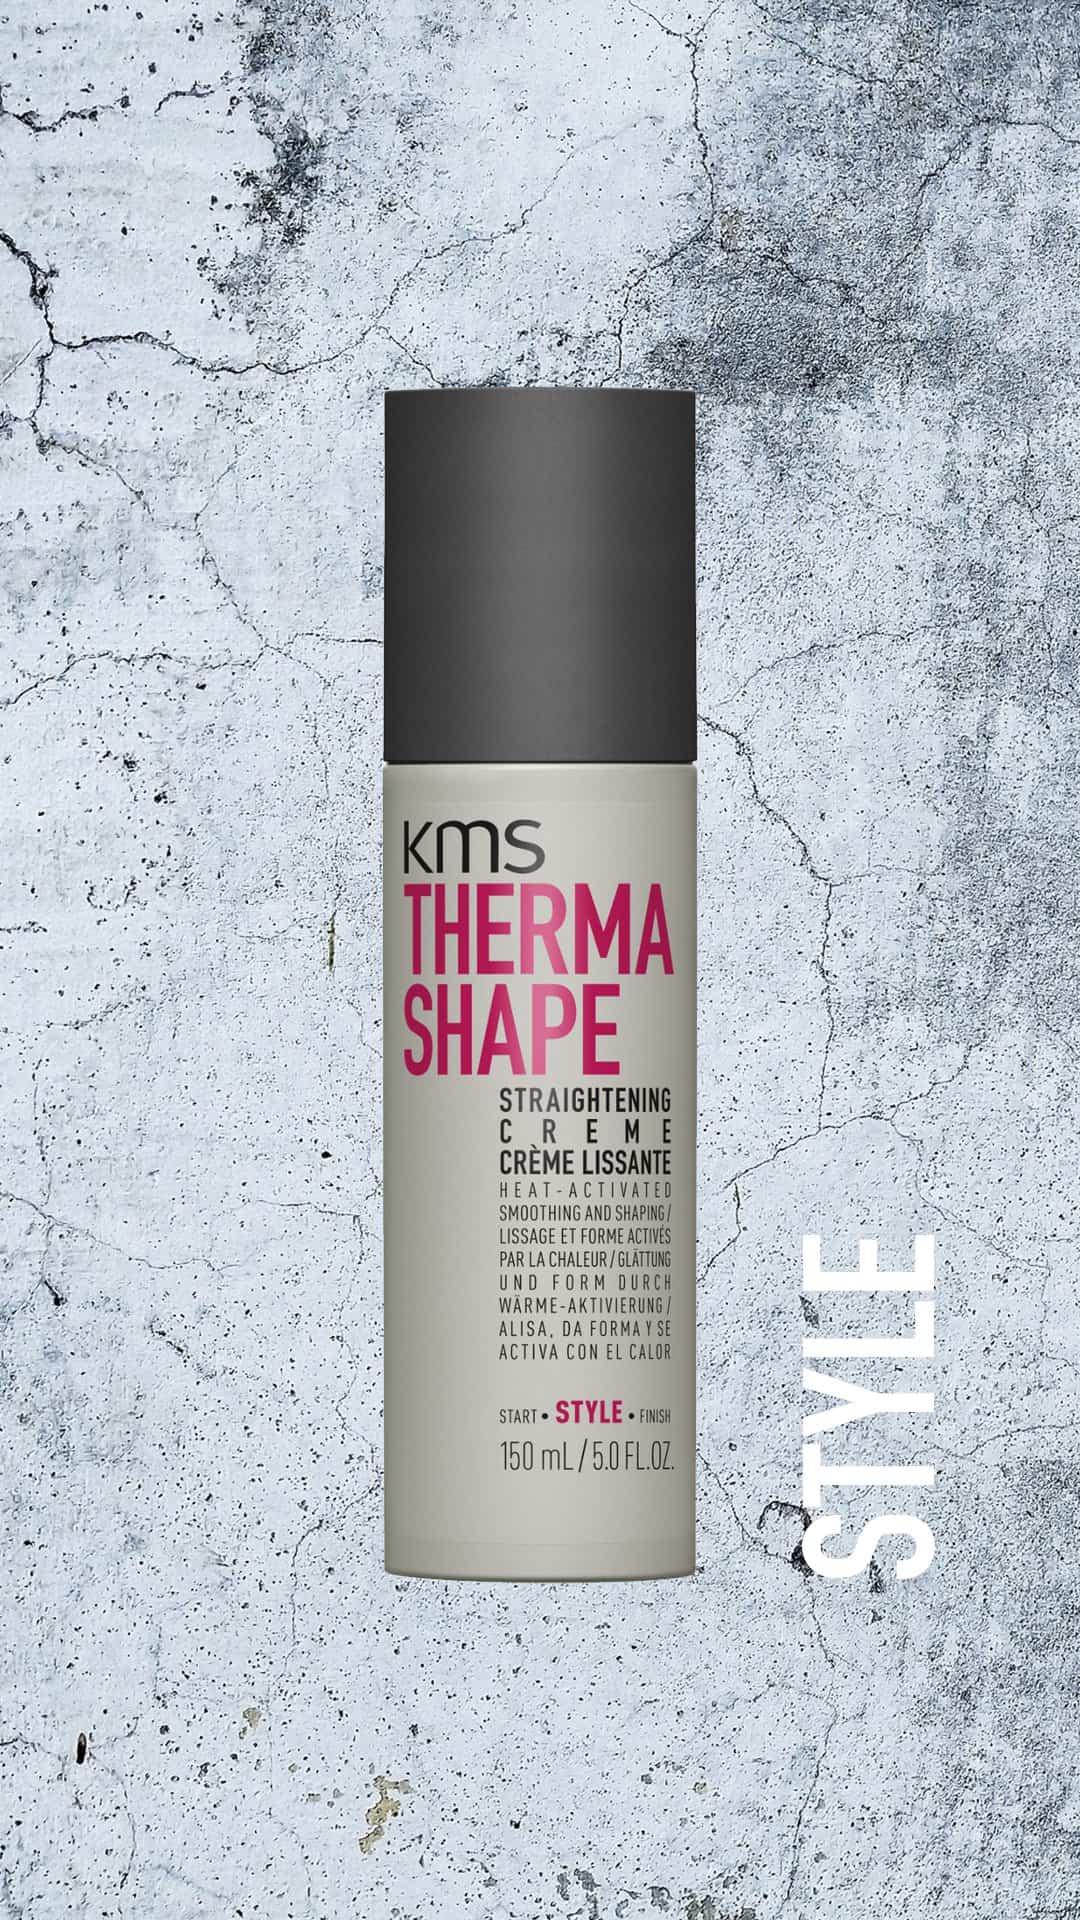 Image of 'KMS ThermaShape Straightening Creme' product in front of a grey marble background